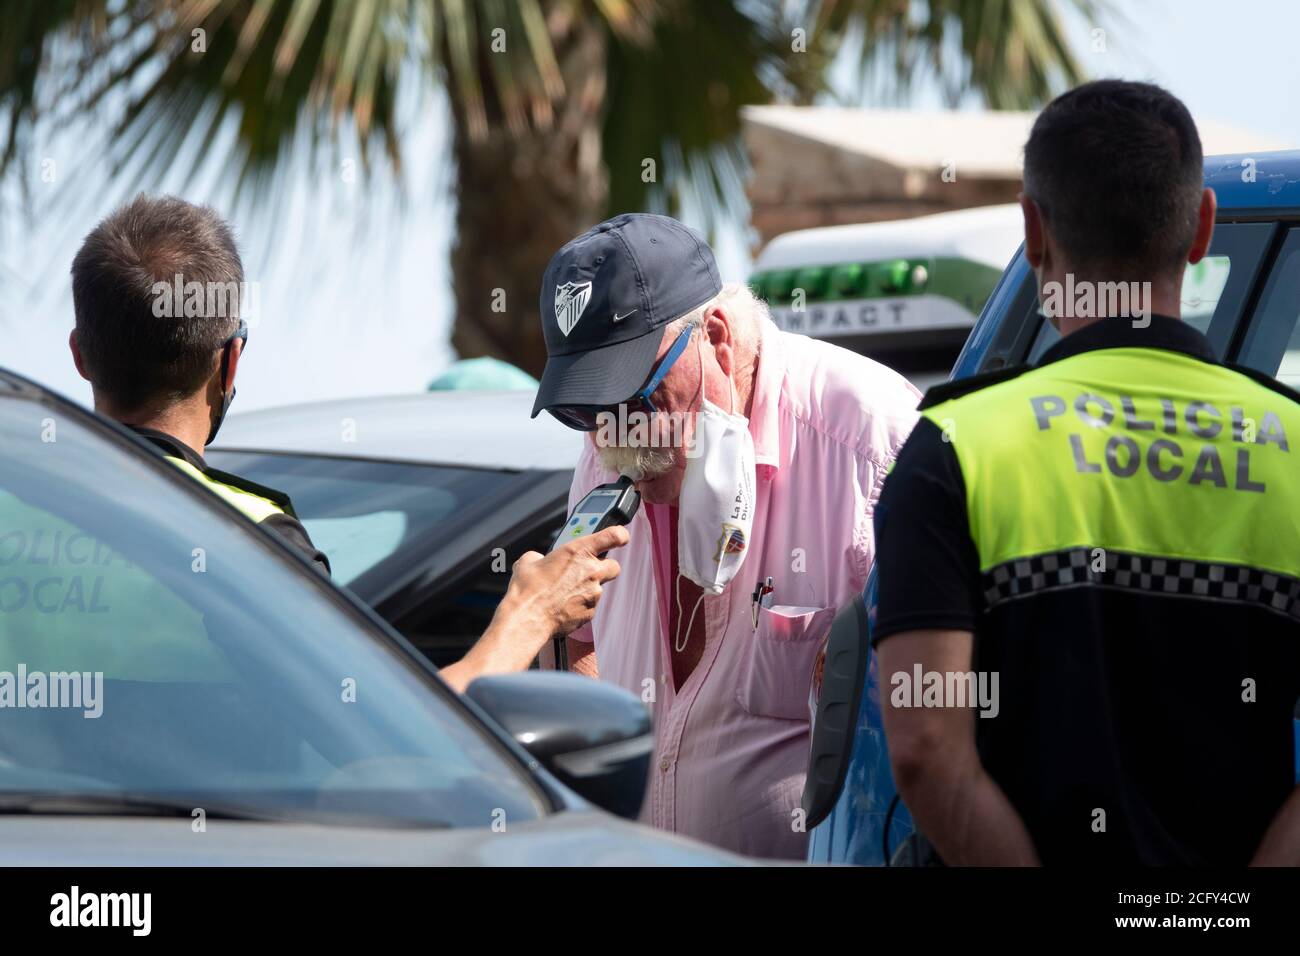 pic shows:  Fuengirola 2020 man breathalyzer test but he passed the test and was allowed to go on Stock Photo